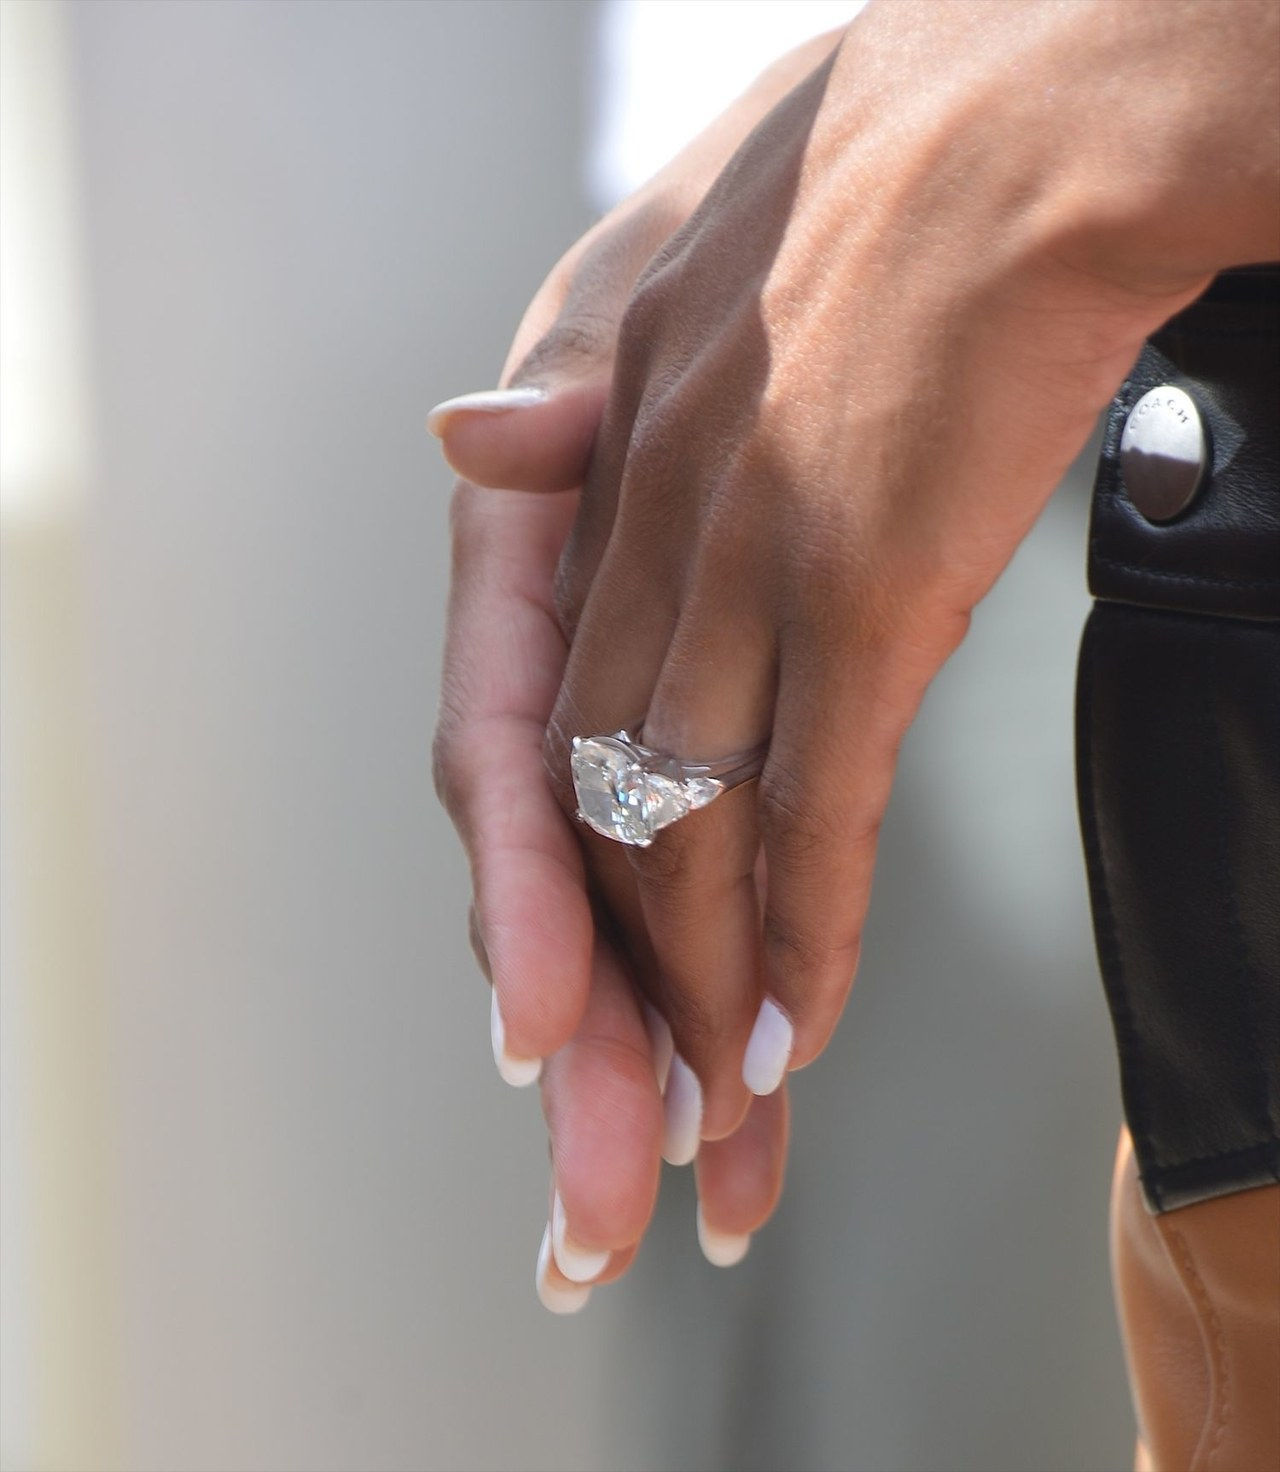 03 ciara engagement ring russell wilson 0319 getty